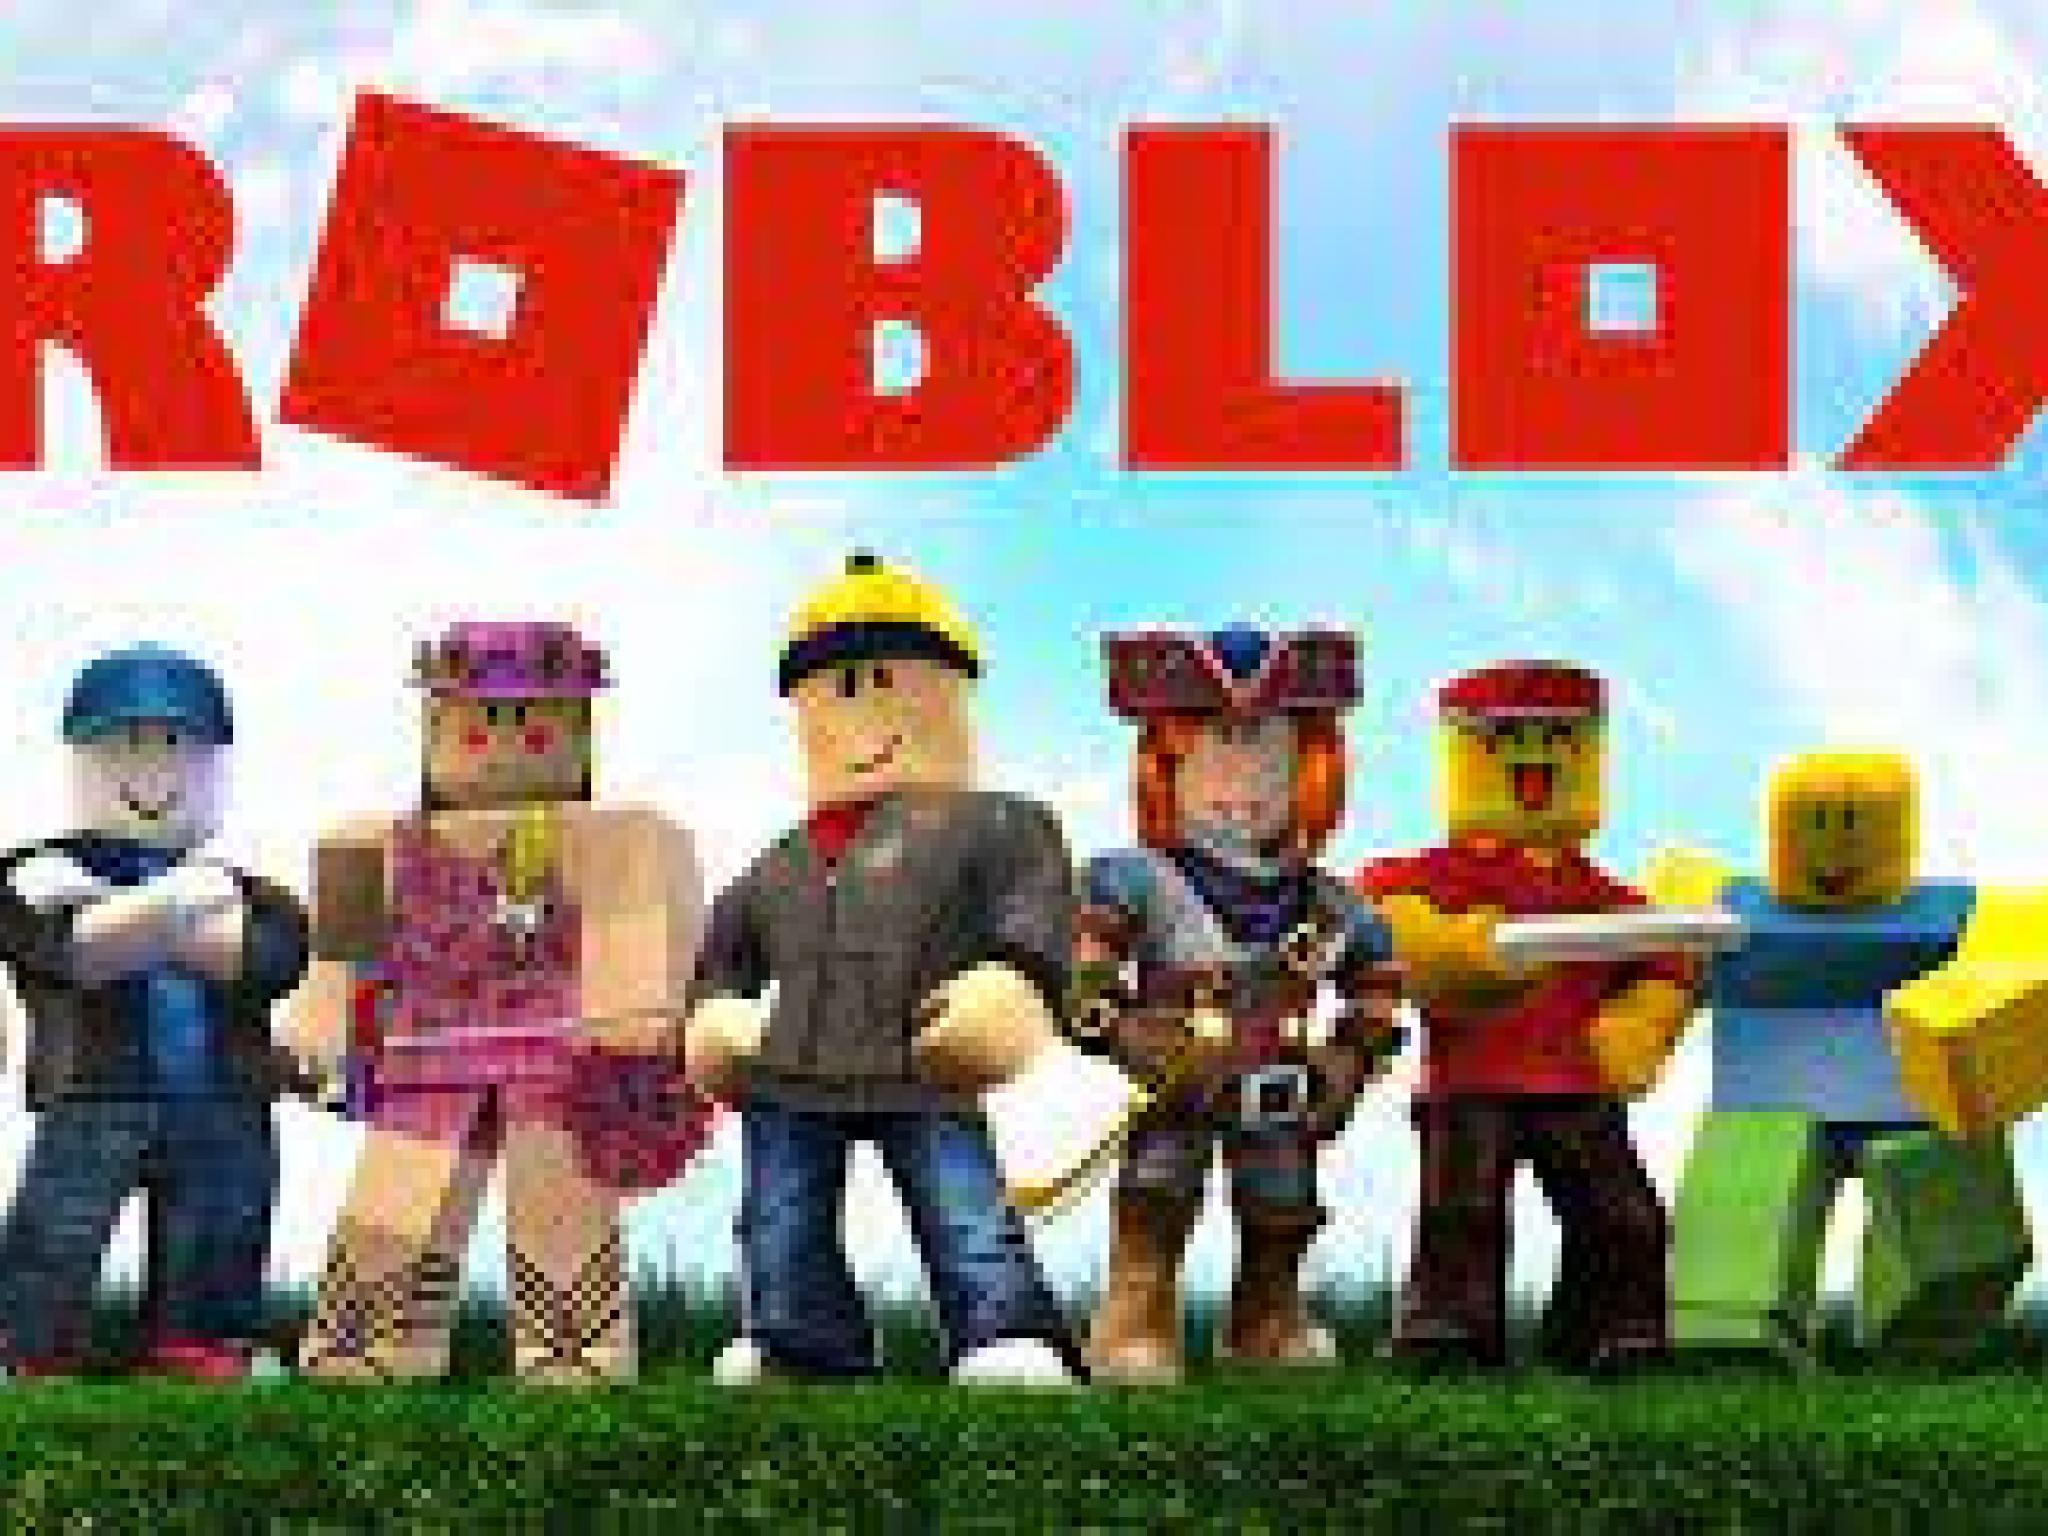  roblox-q1-earnings-preview-analyst-estimates-advertising-growth-key-items-to-watch 